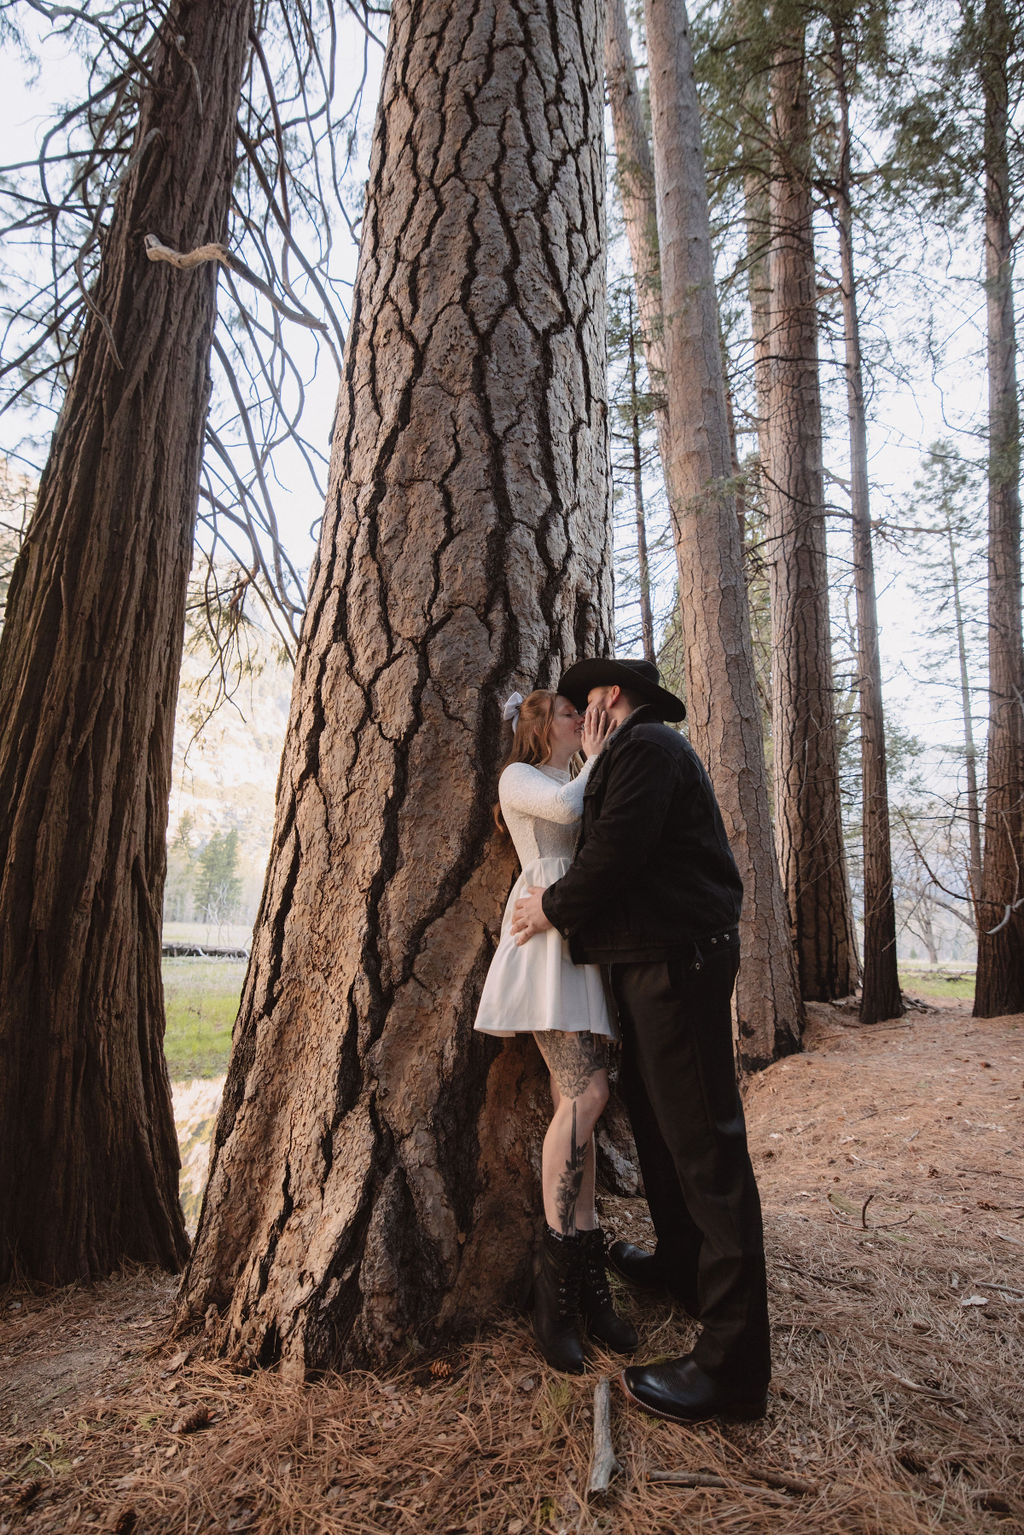 A couple embracing and kissing next to a large tree in a forest, the man in a black suit and hat, and the woman in a white dress.